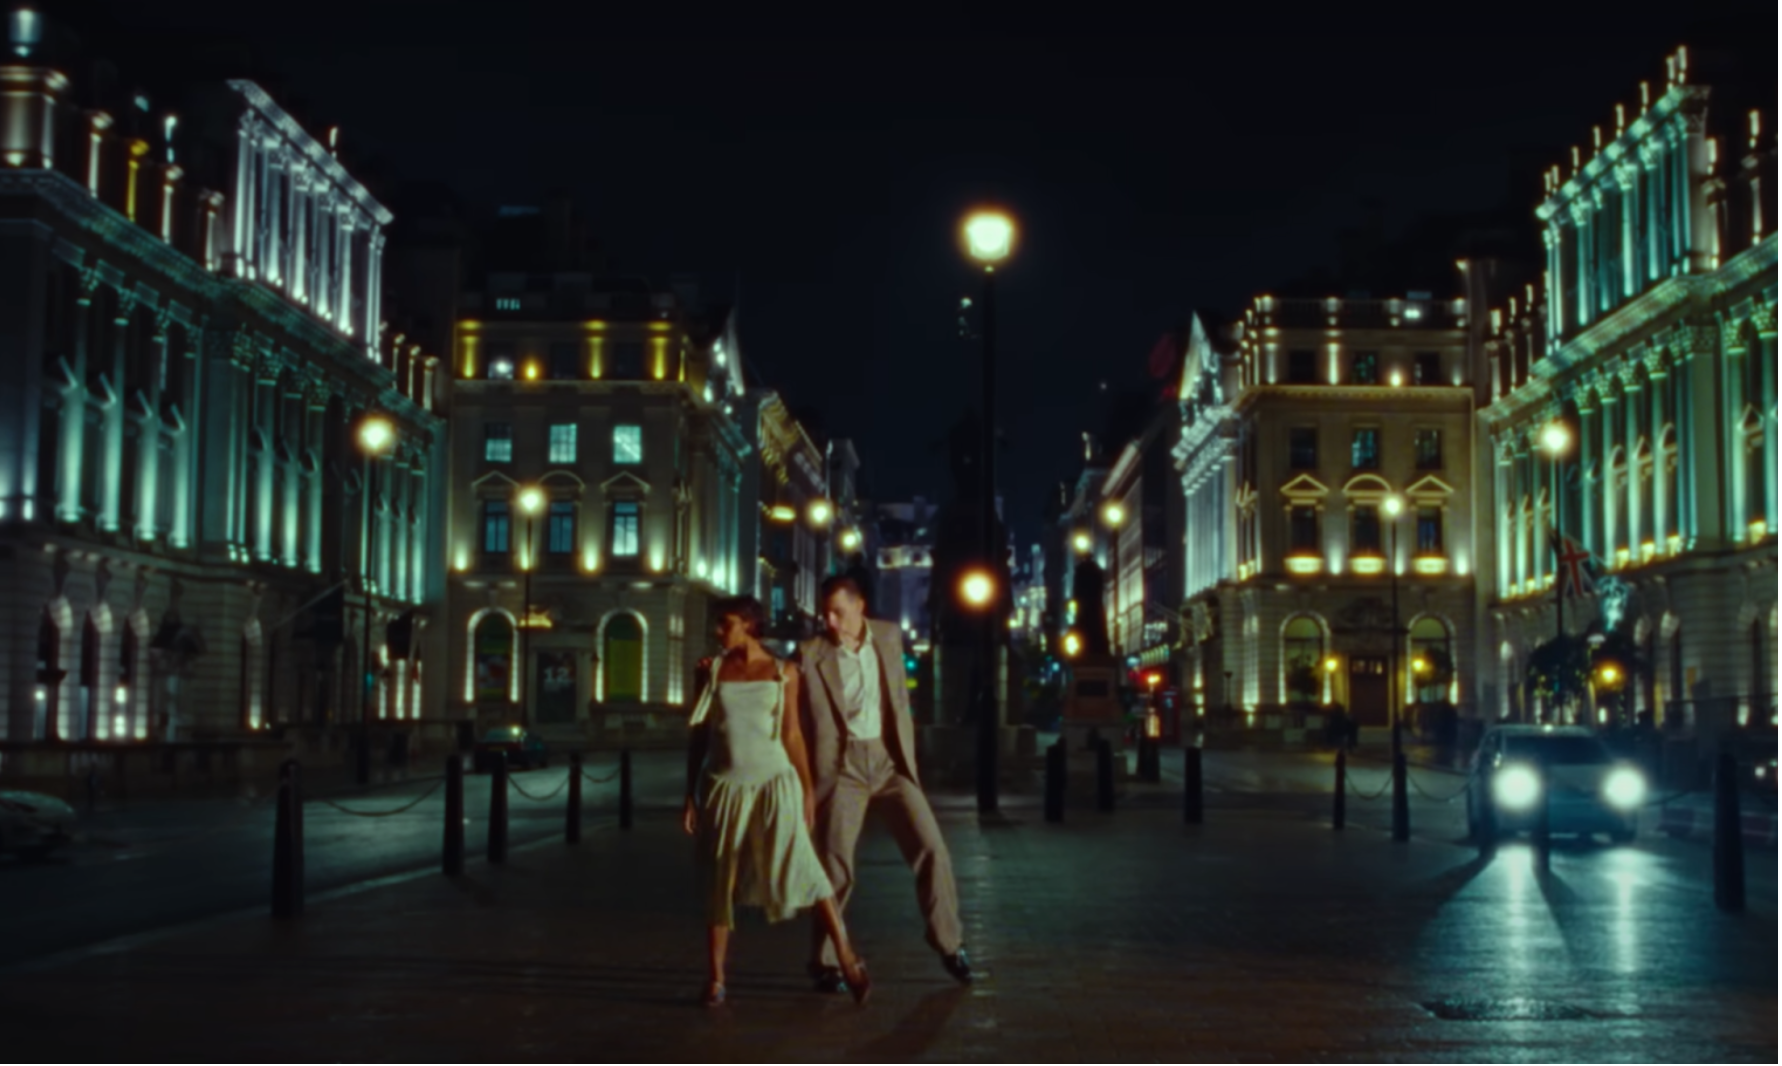 Two actors dance together in the new music video of “A Night to Remember.”